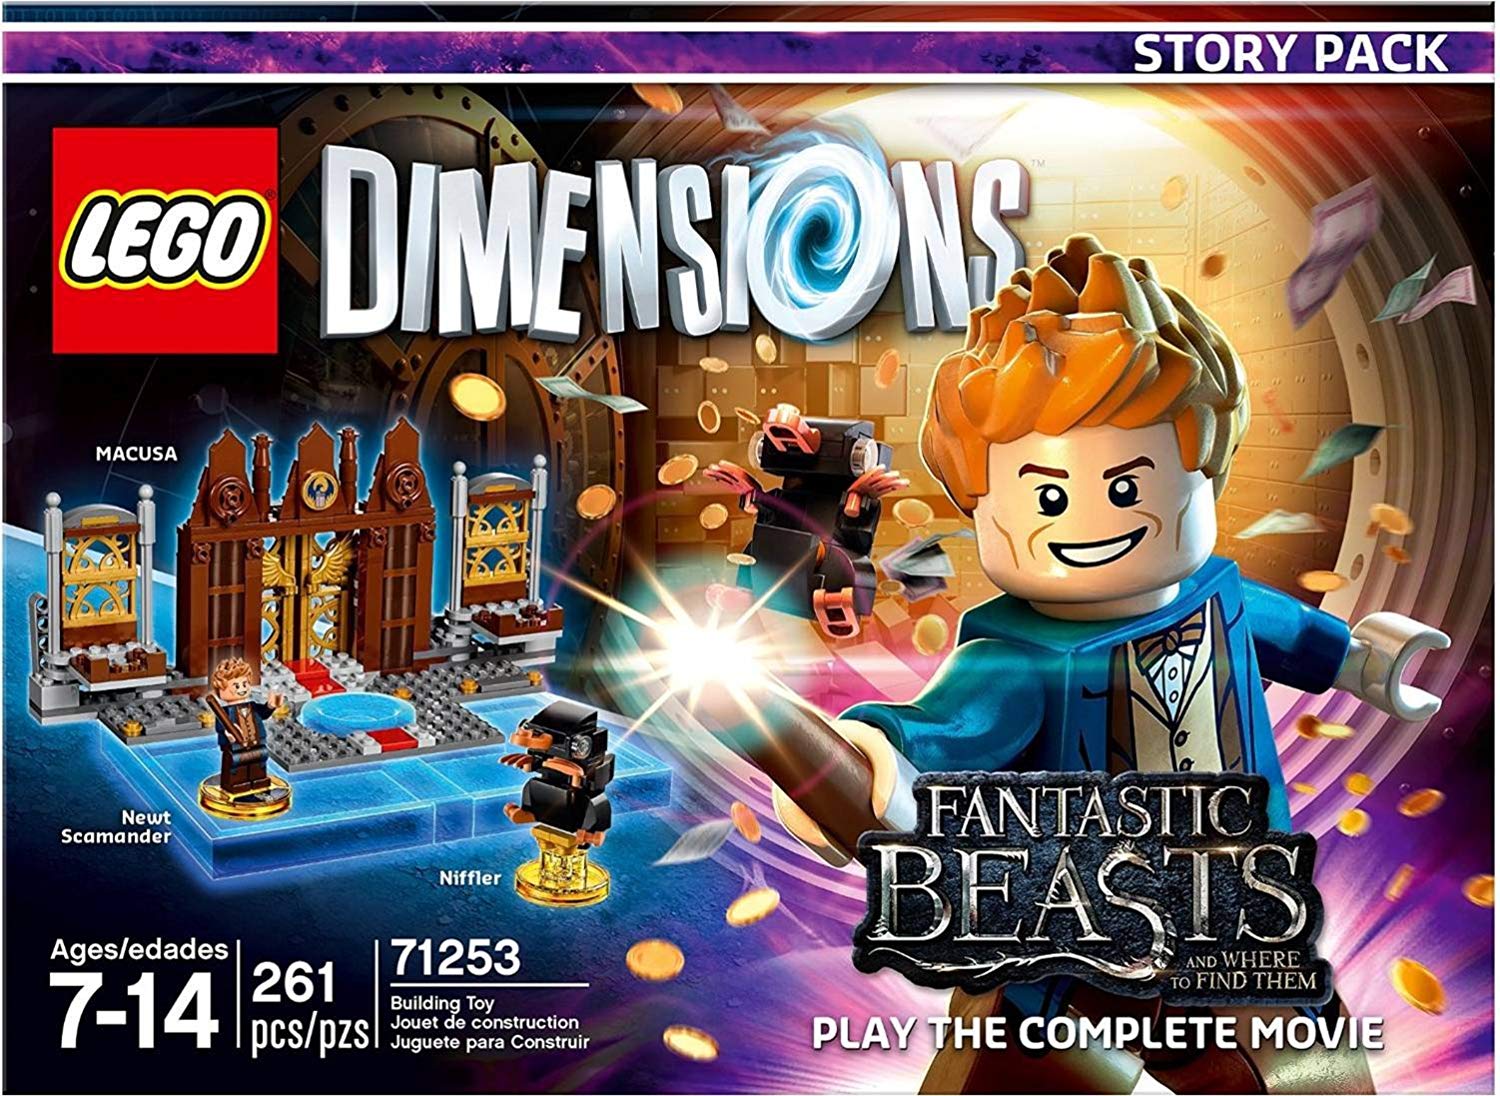 Lego Dimensions Fantastic Beasts and Where to Find Them Story Pack (71253) - Figurák Lego Dimension